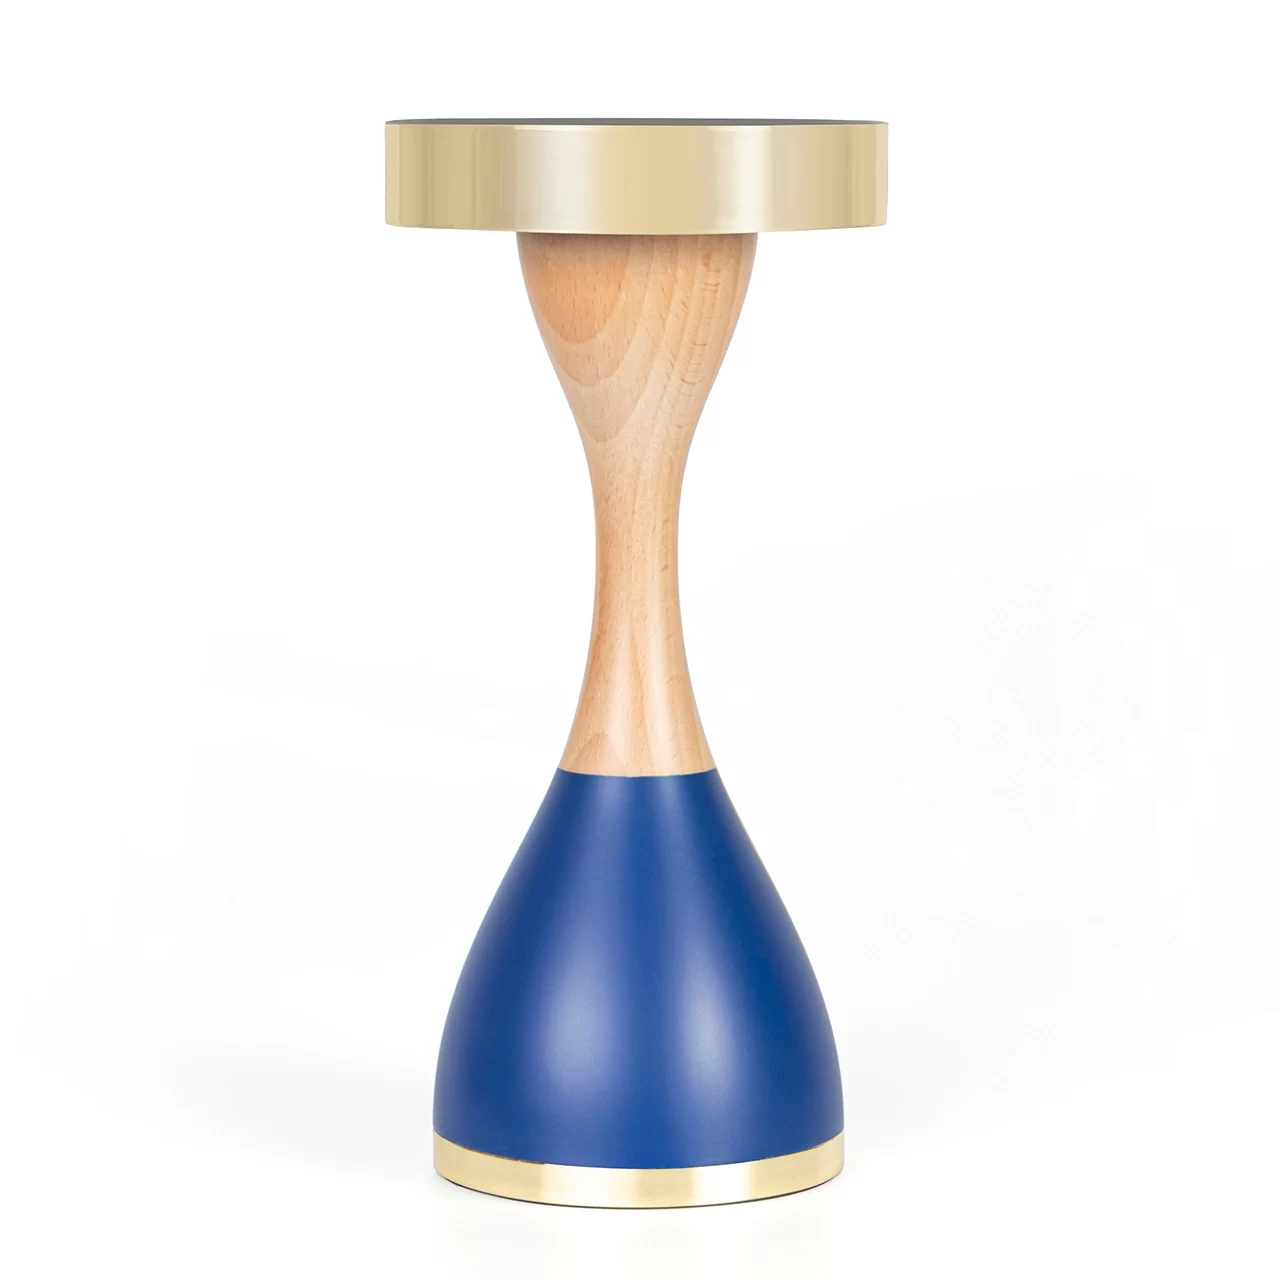 table lamp that has silver head with wooden body and has blue accent color